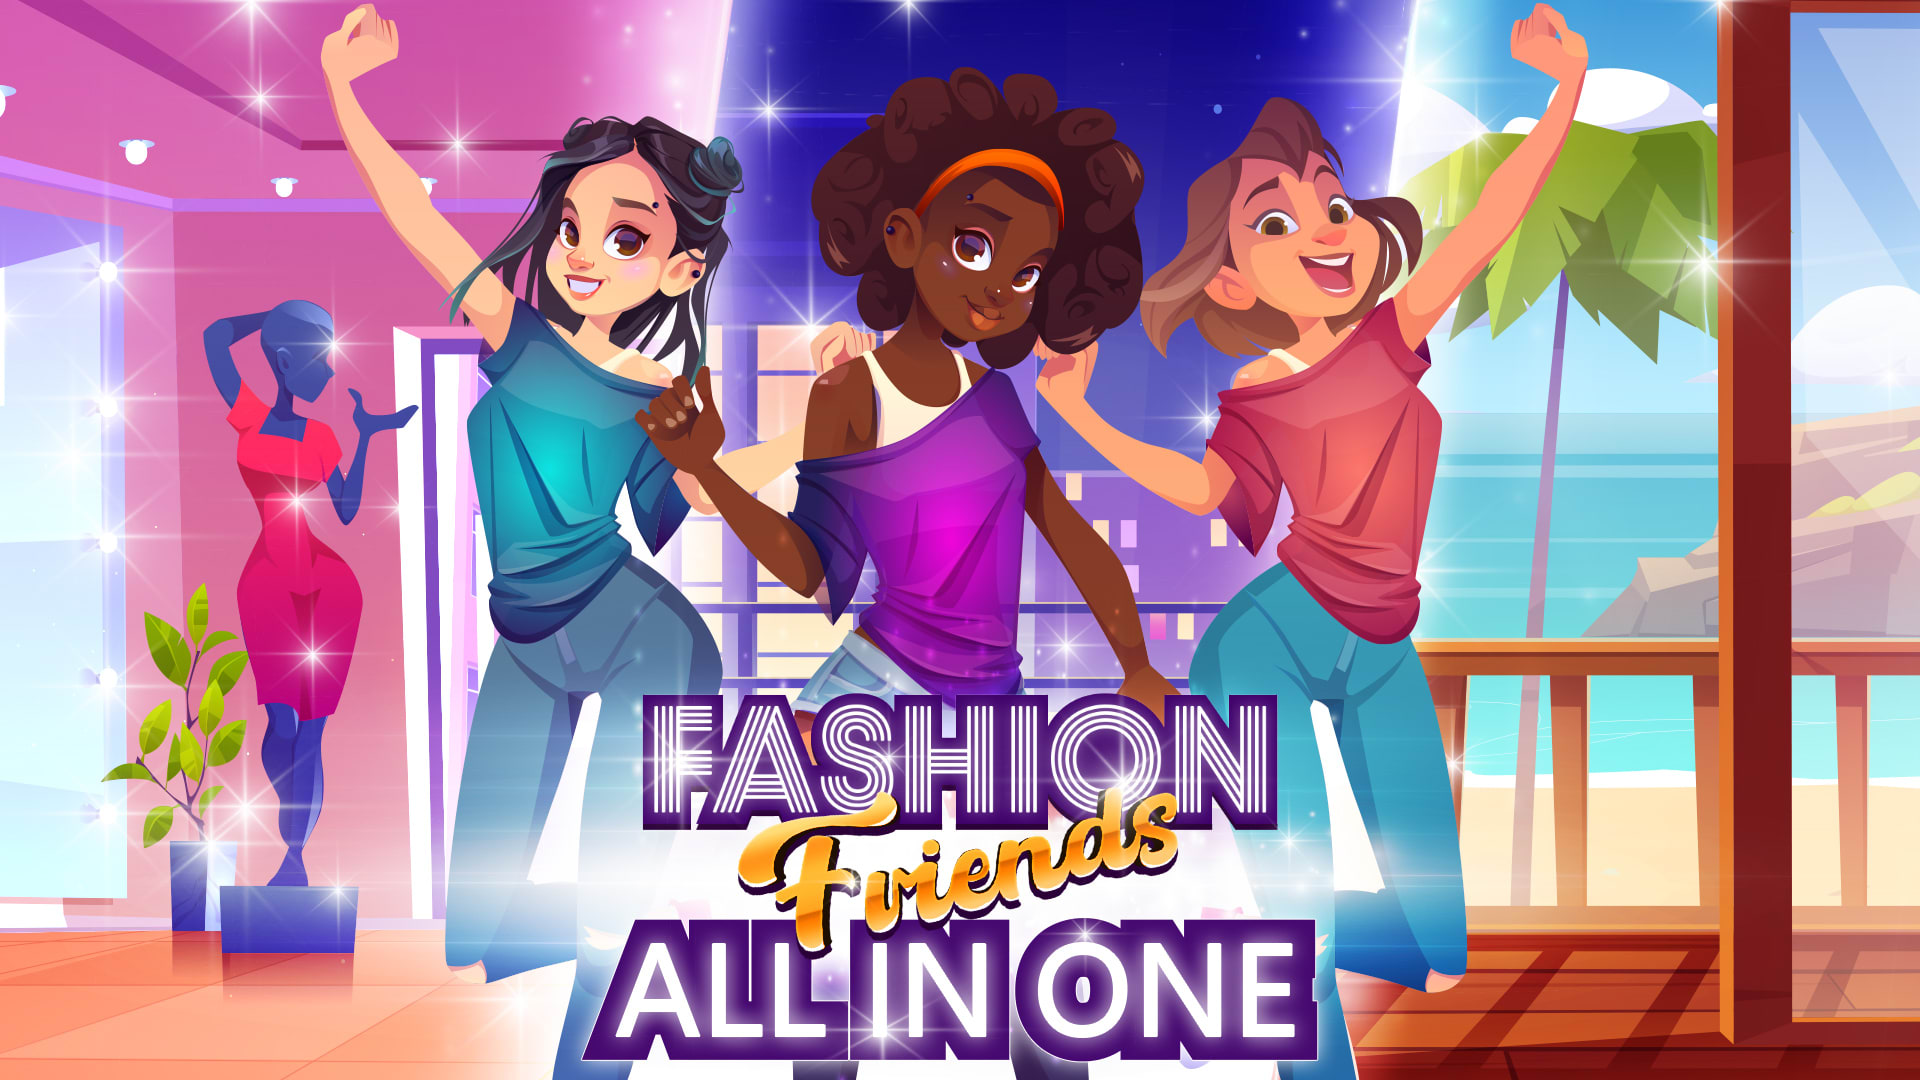 Fashion Friends: All in One